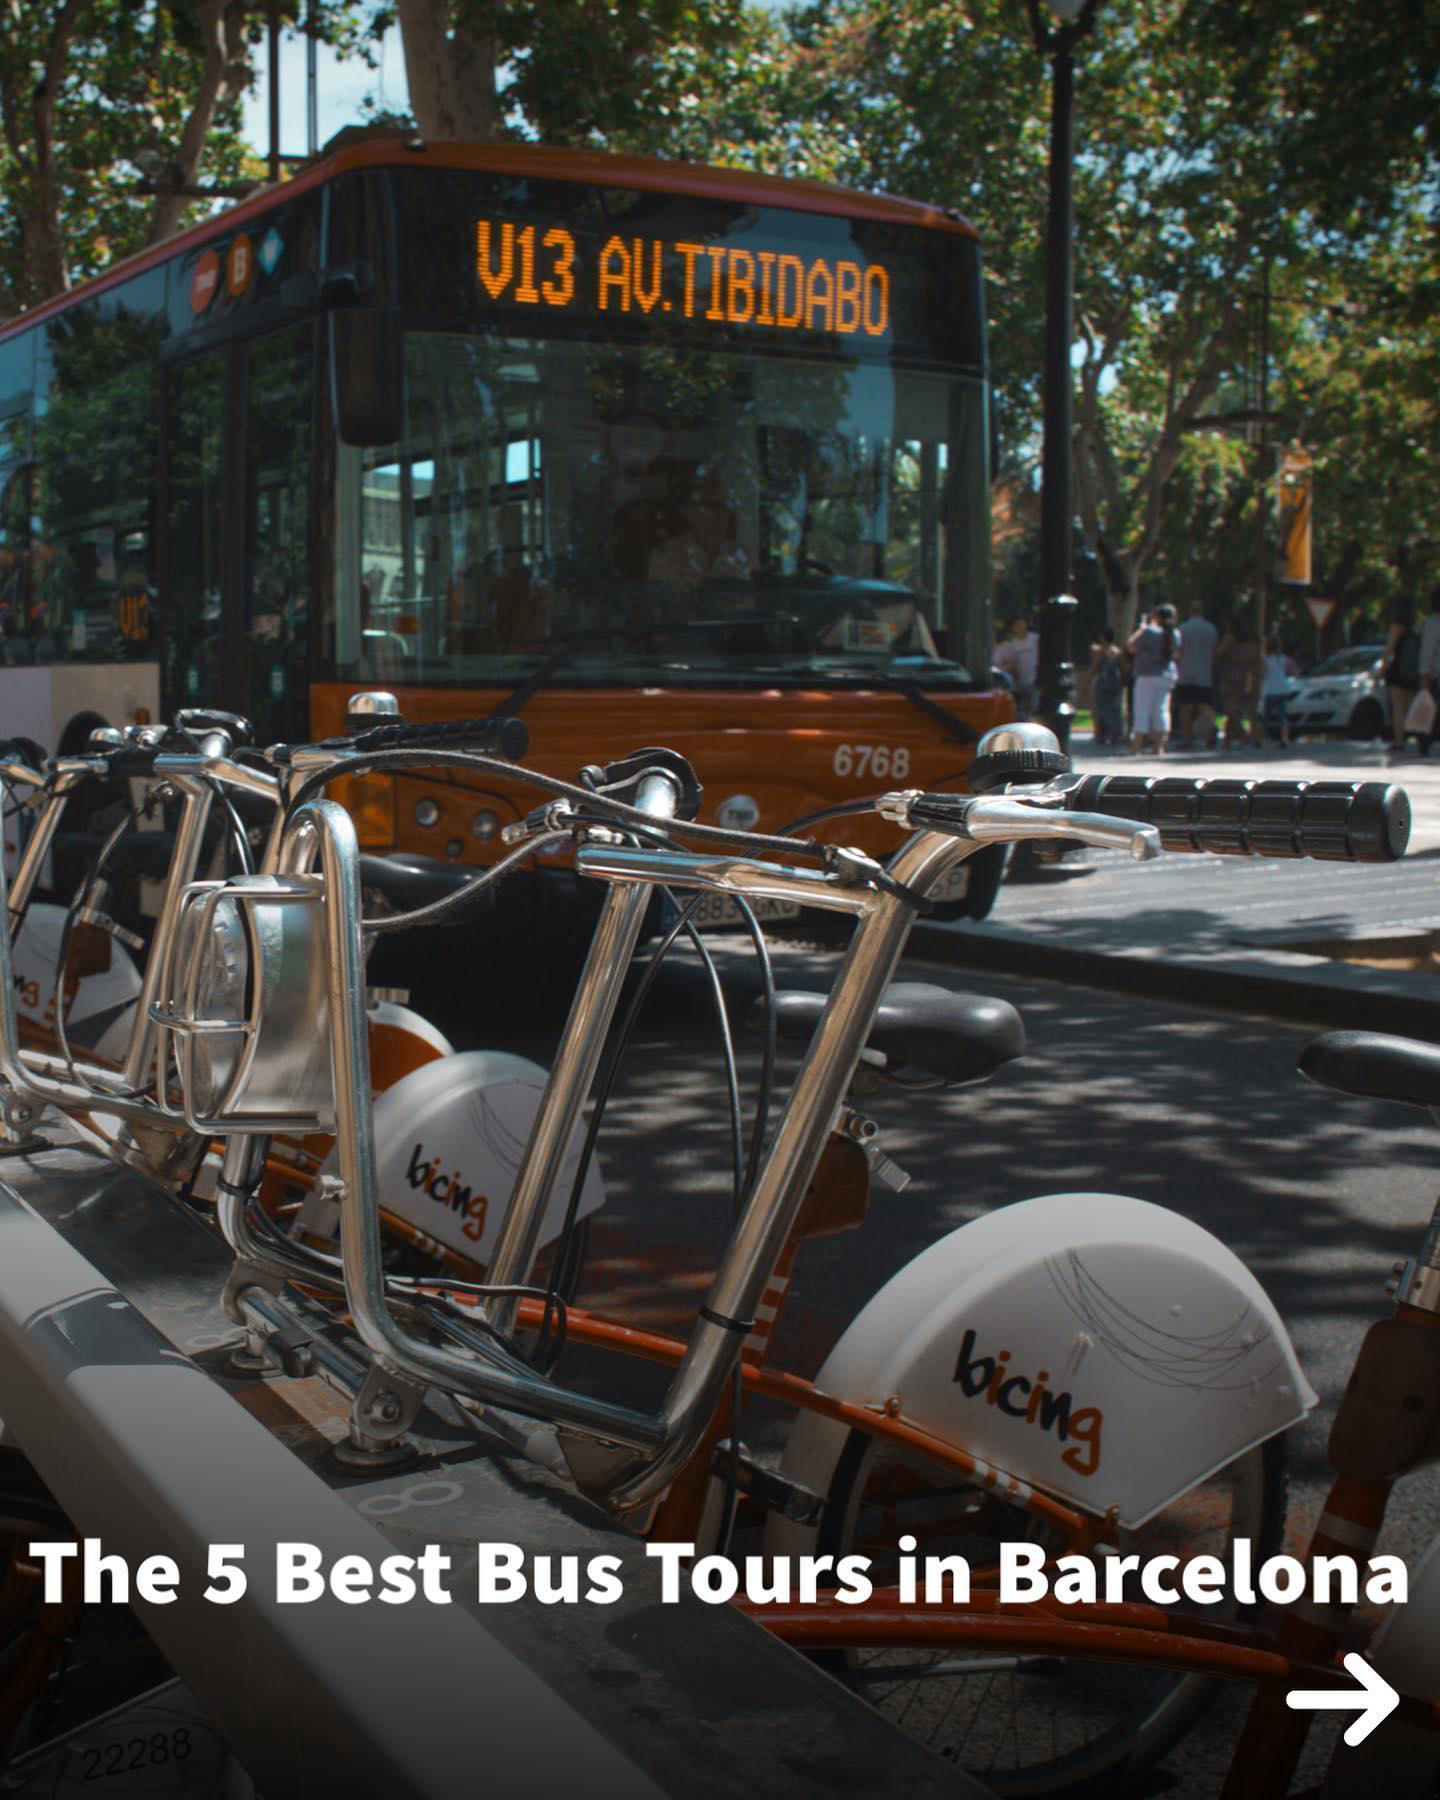 The 5 best bus tours in Barcelona